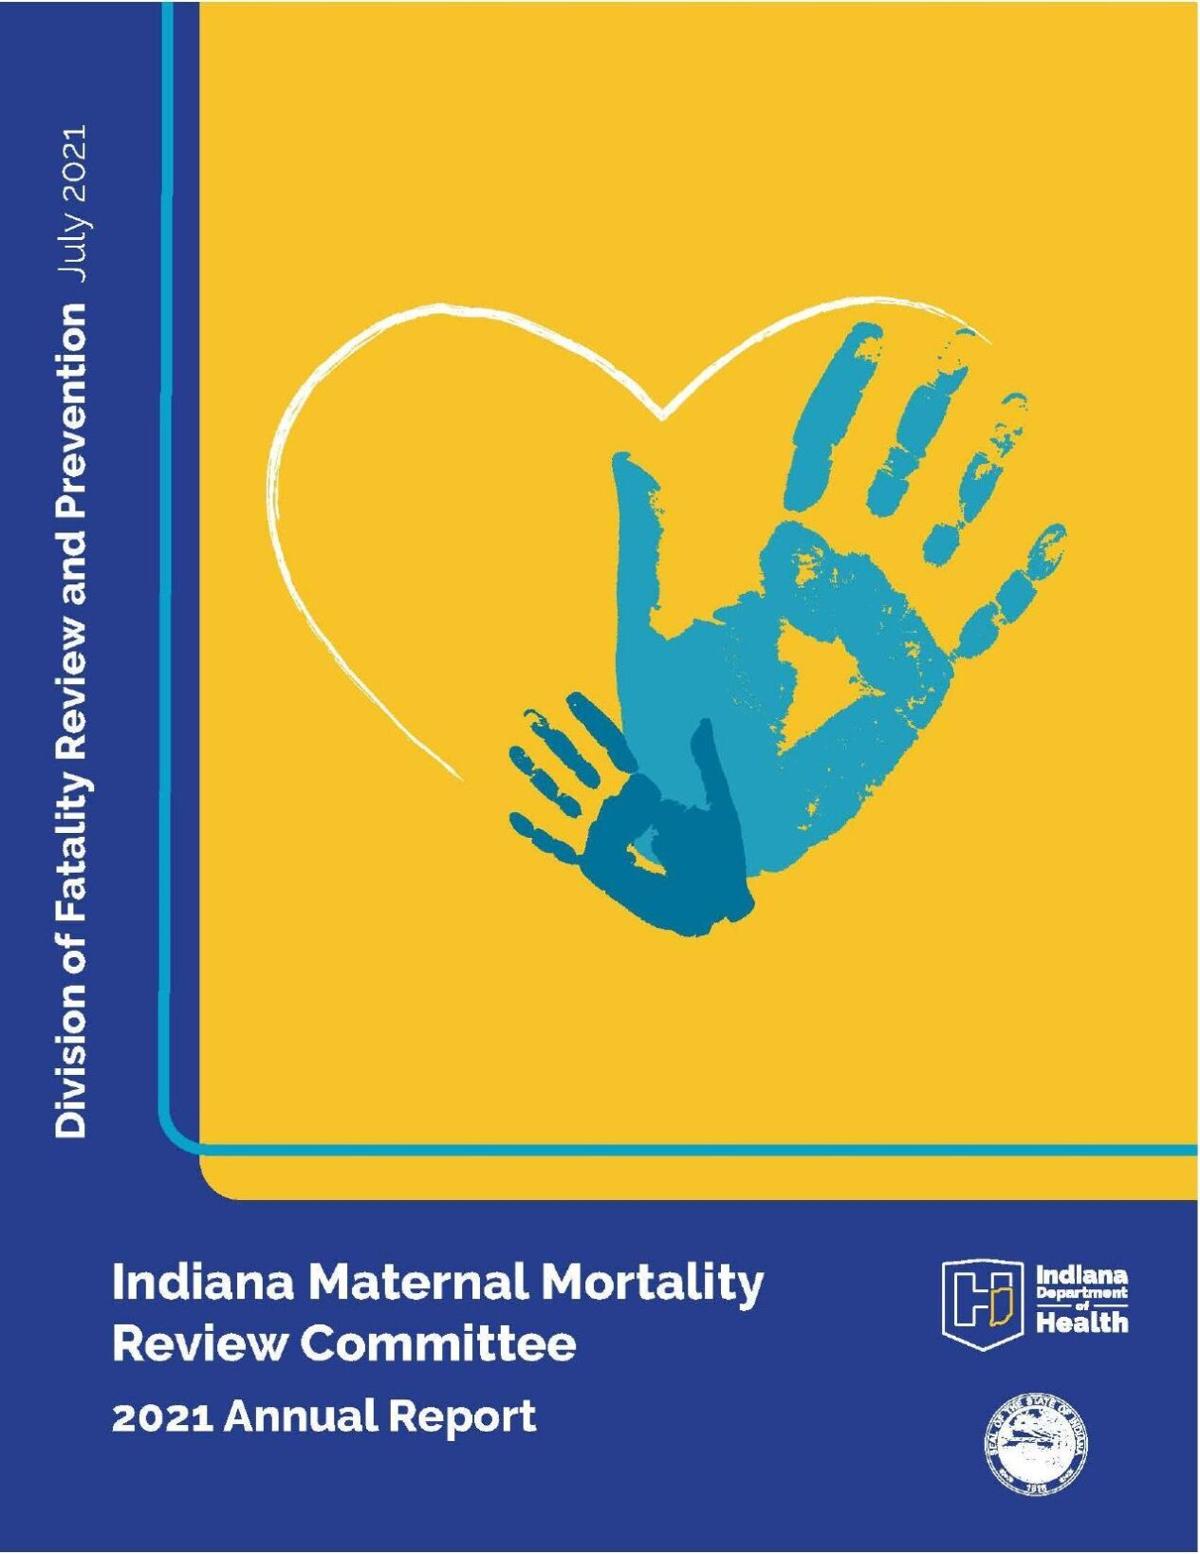 Indiana Maternal Mortality Review Committee 2021 annual report